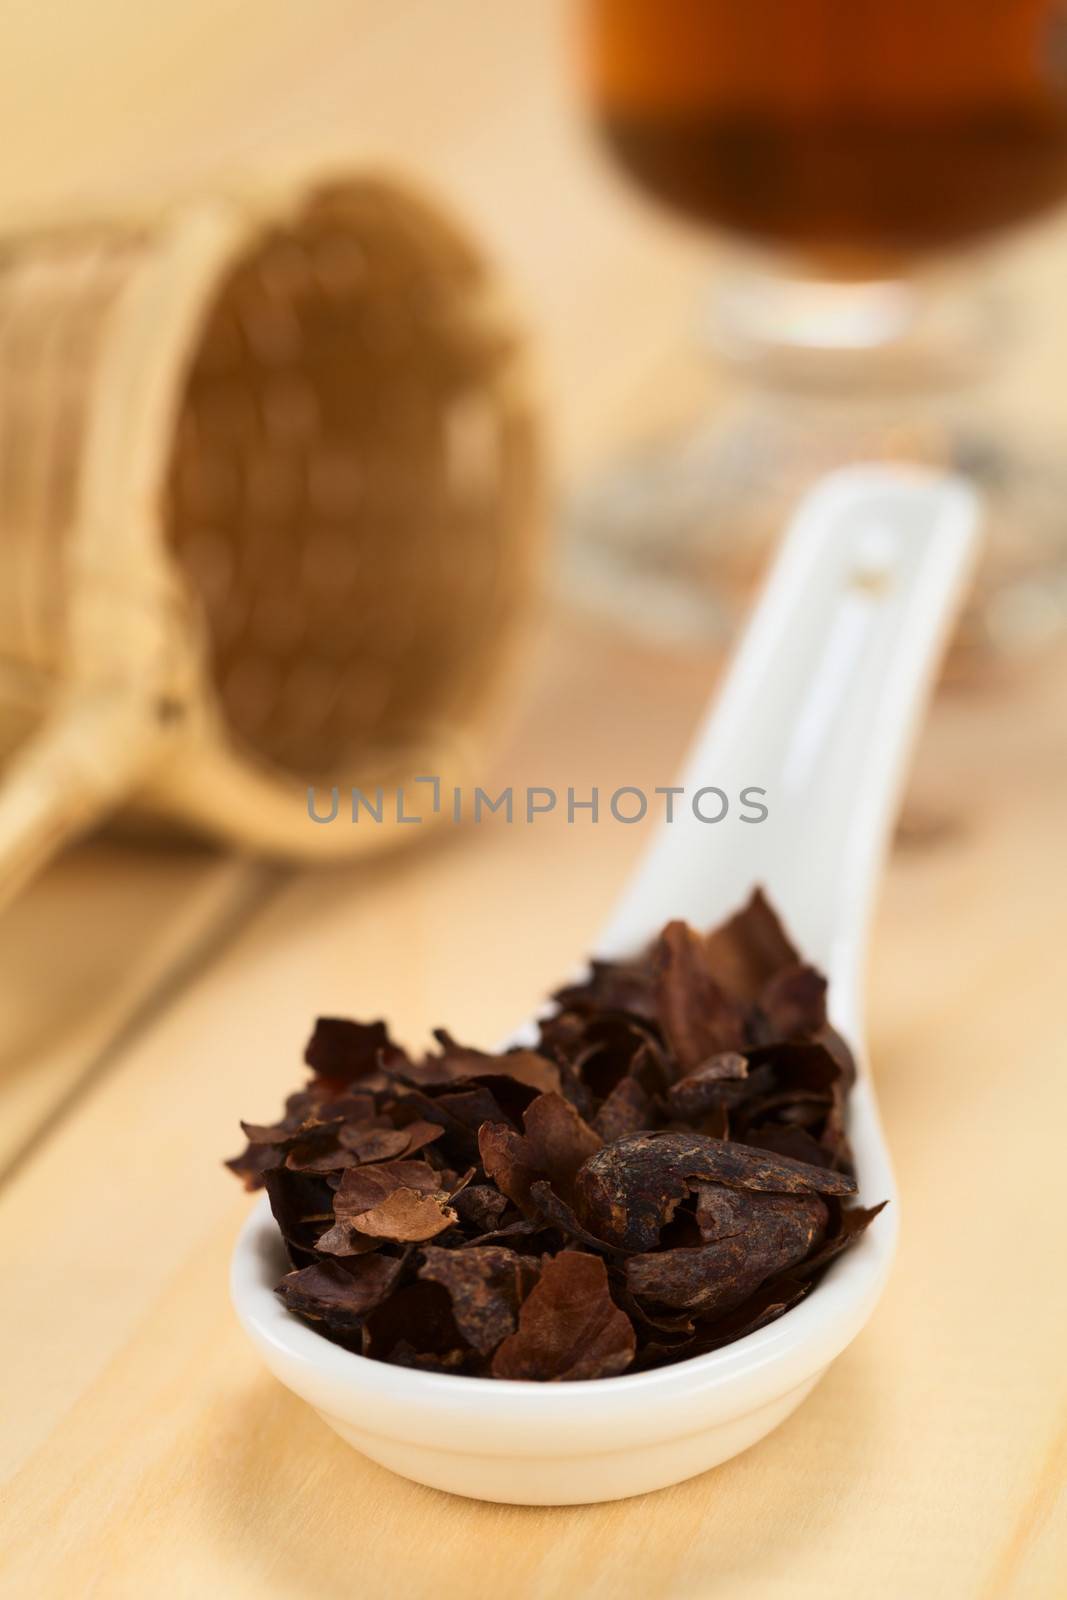 Cacao shell flakes to prepare tea, which is rich in flavonoids and antioxidants (Very Shallow Depth of Field, Focus one third into the flakes)